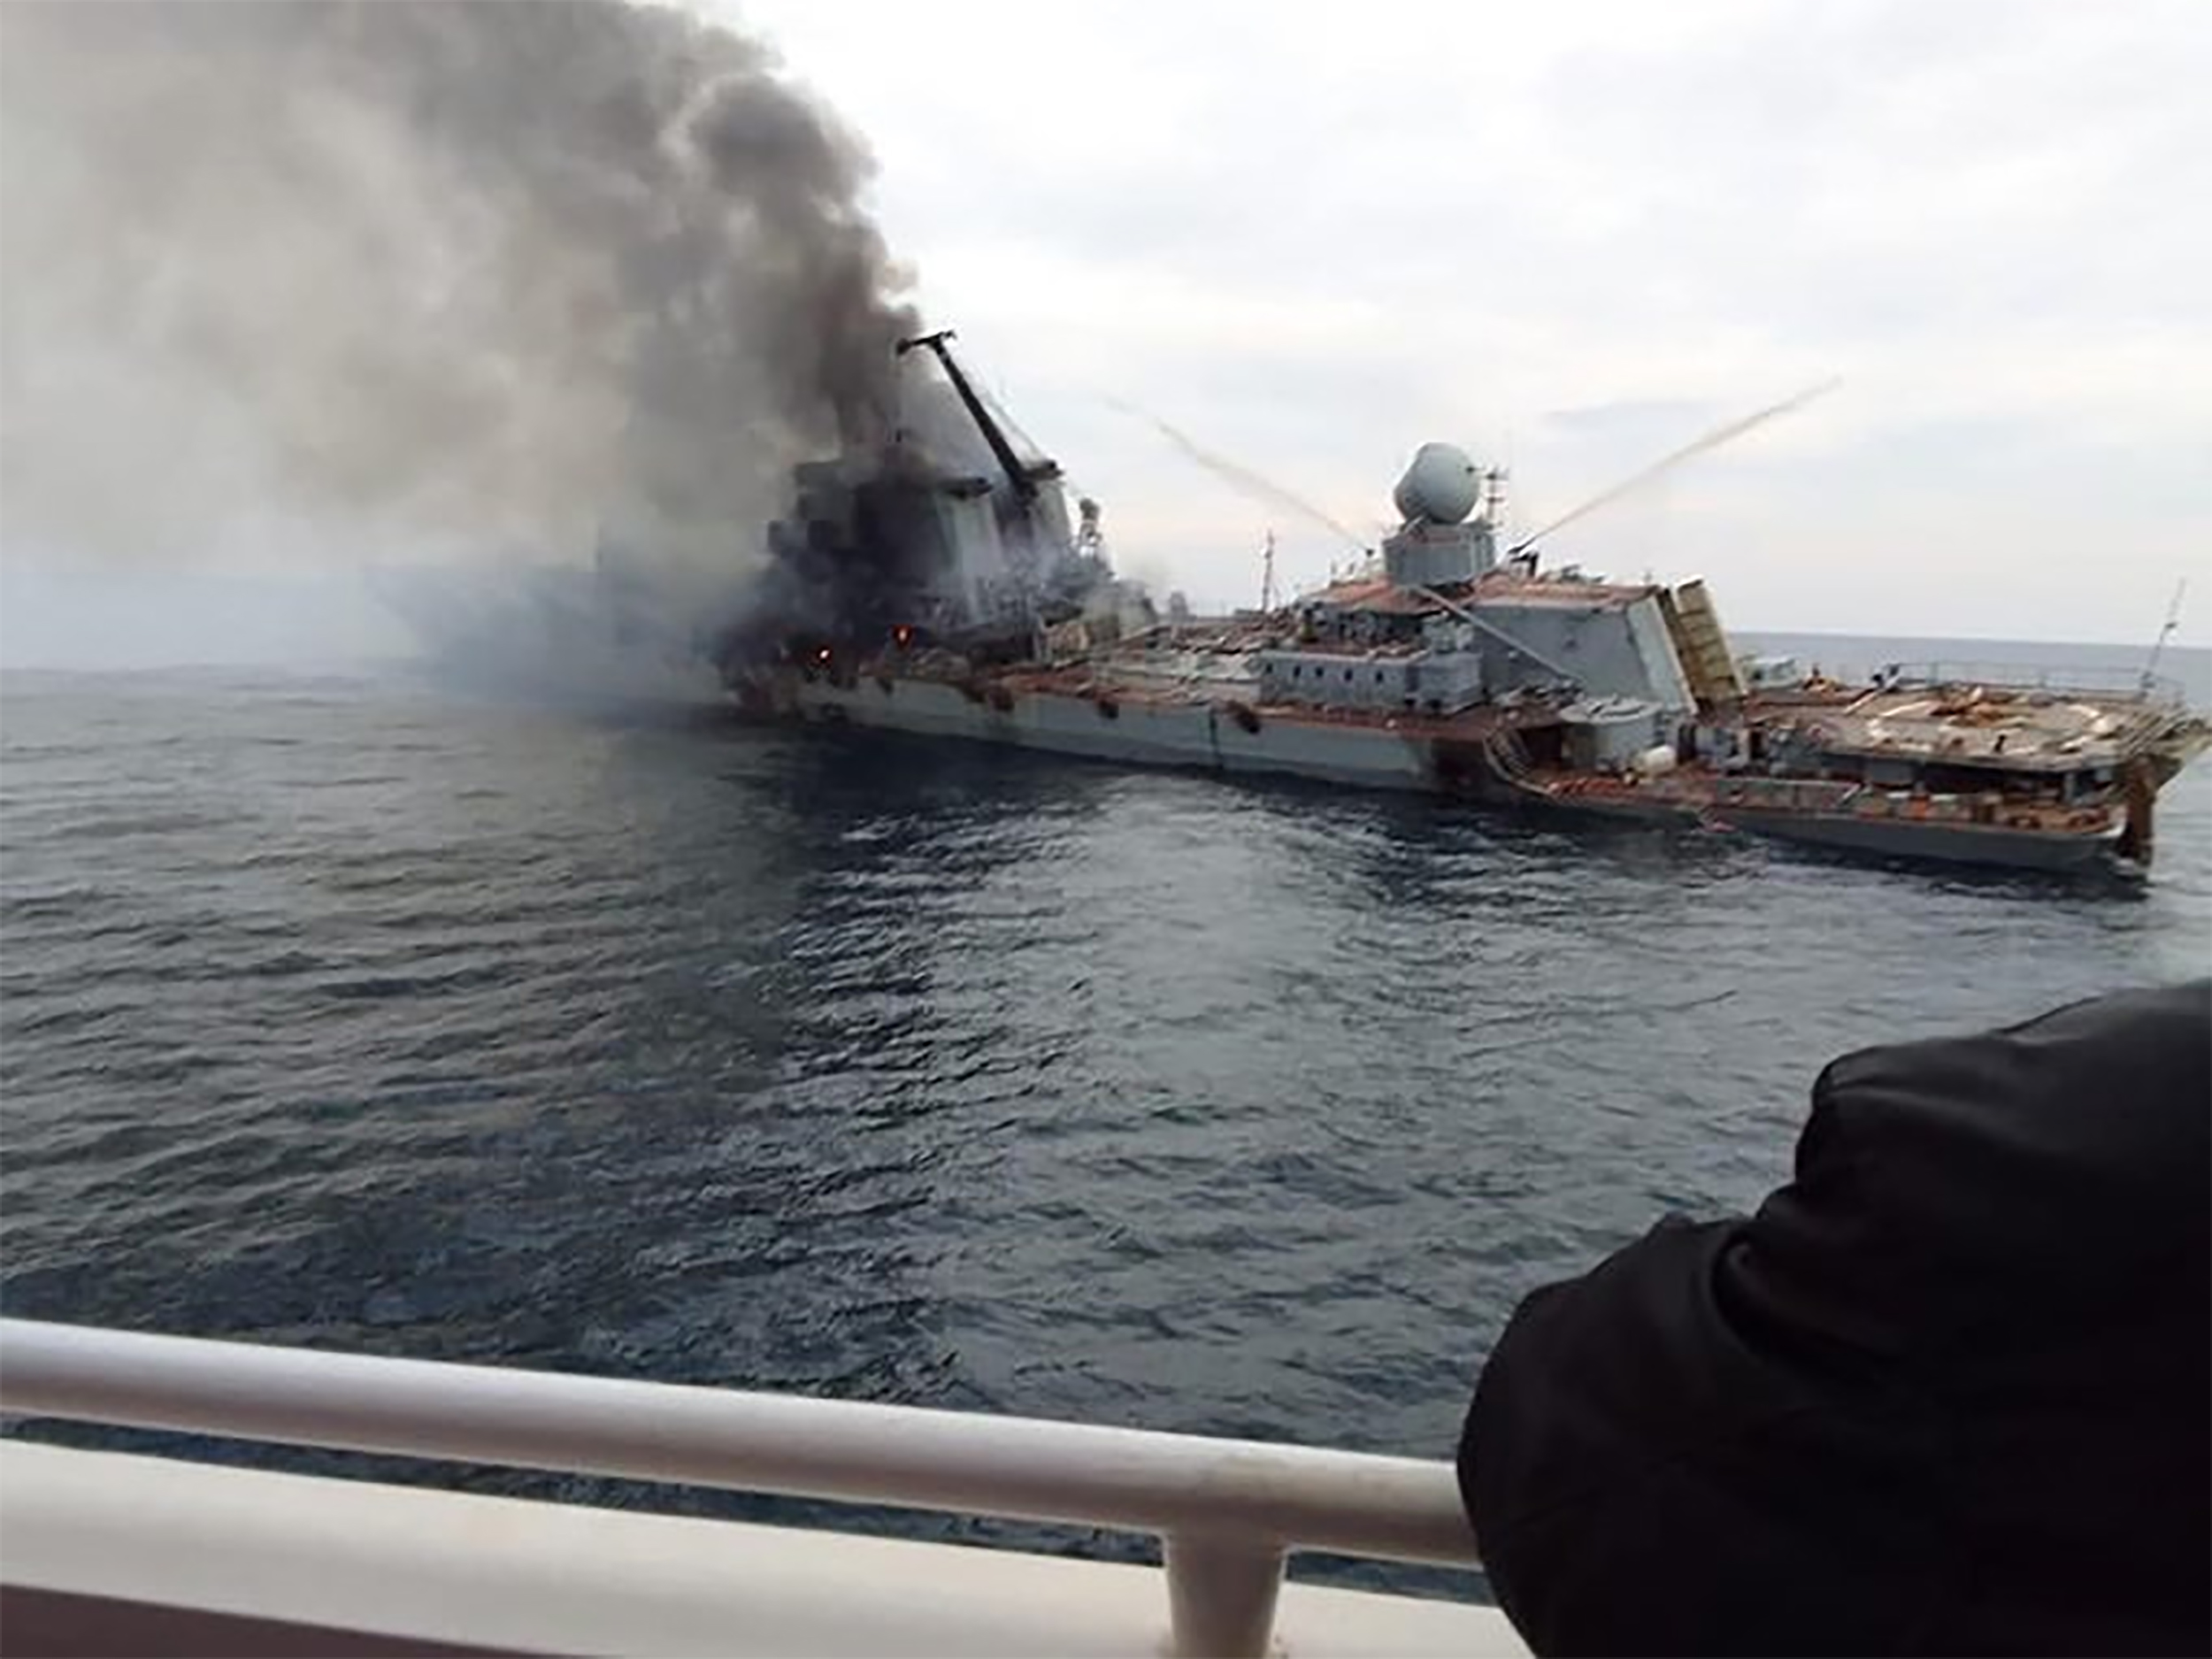 Images emerged early Monday, April 18, on social media showing Russia's guided-missile cruiser, the Moskva, badly damaged and on fire in the hours before the ship sunk in the Black Sea on April 14.